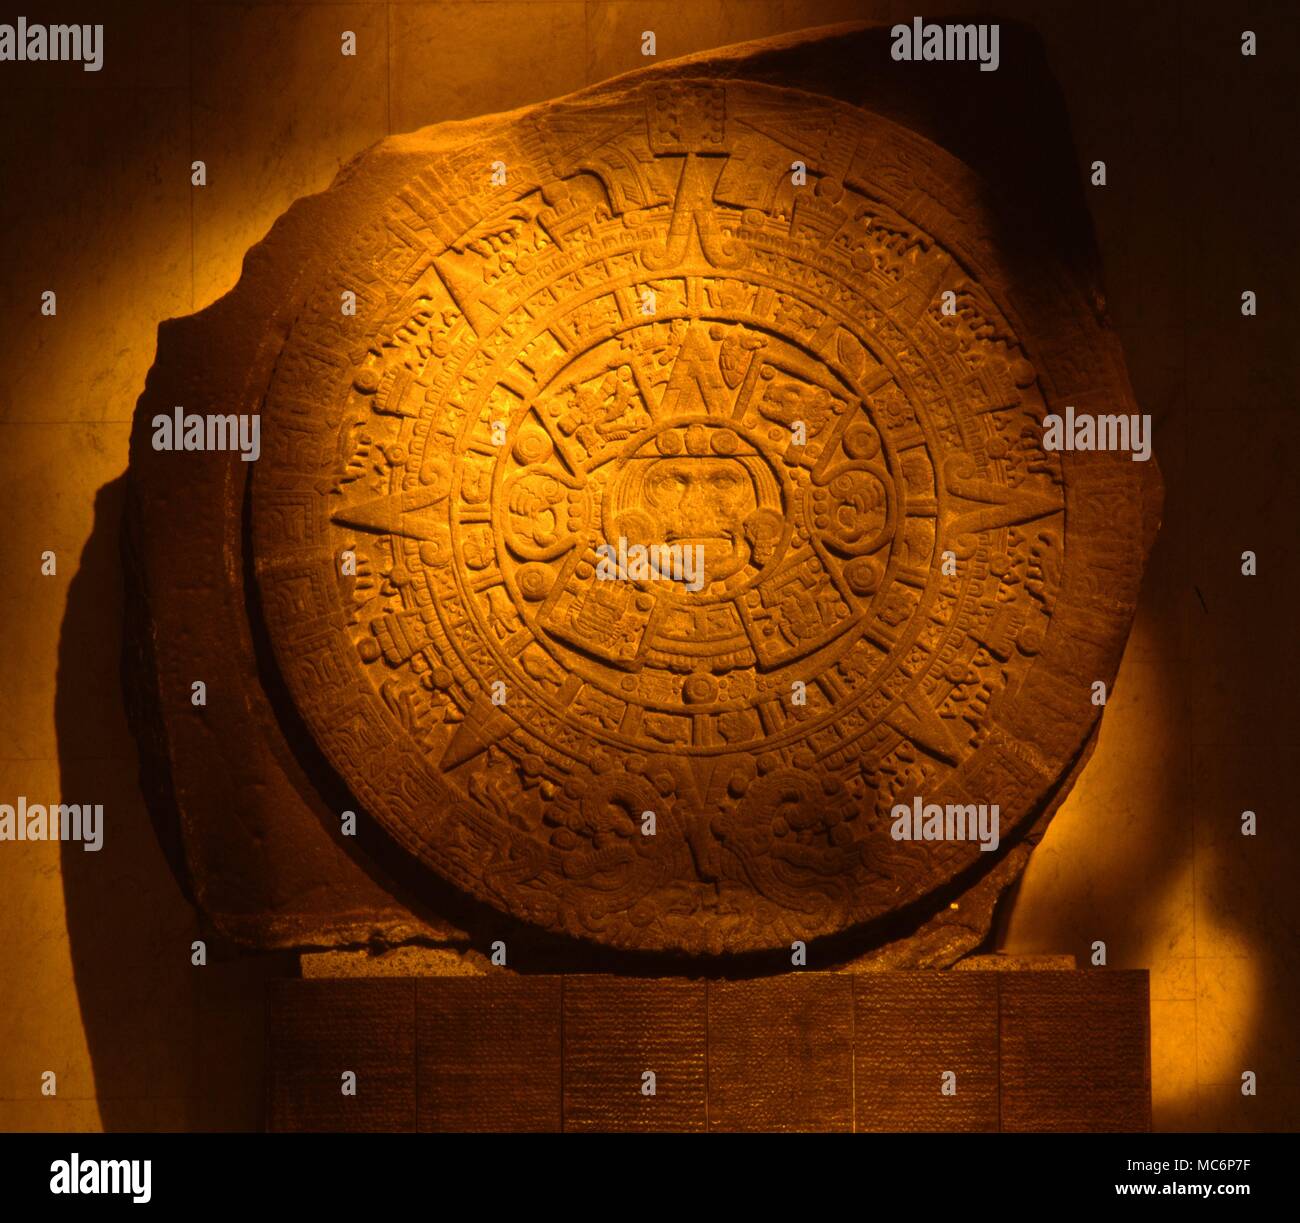 The stone is about 12 feet in diameter abd weighs just over 24 tons. The face of Tonatiuh, the Sun God, is in the centre. In the collection of the National Anthropoloical Museum, Mexico City. Stock Photo